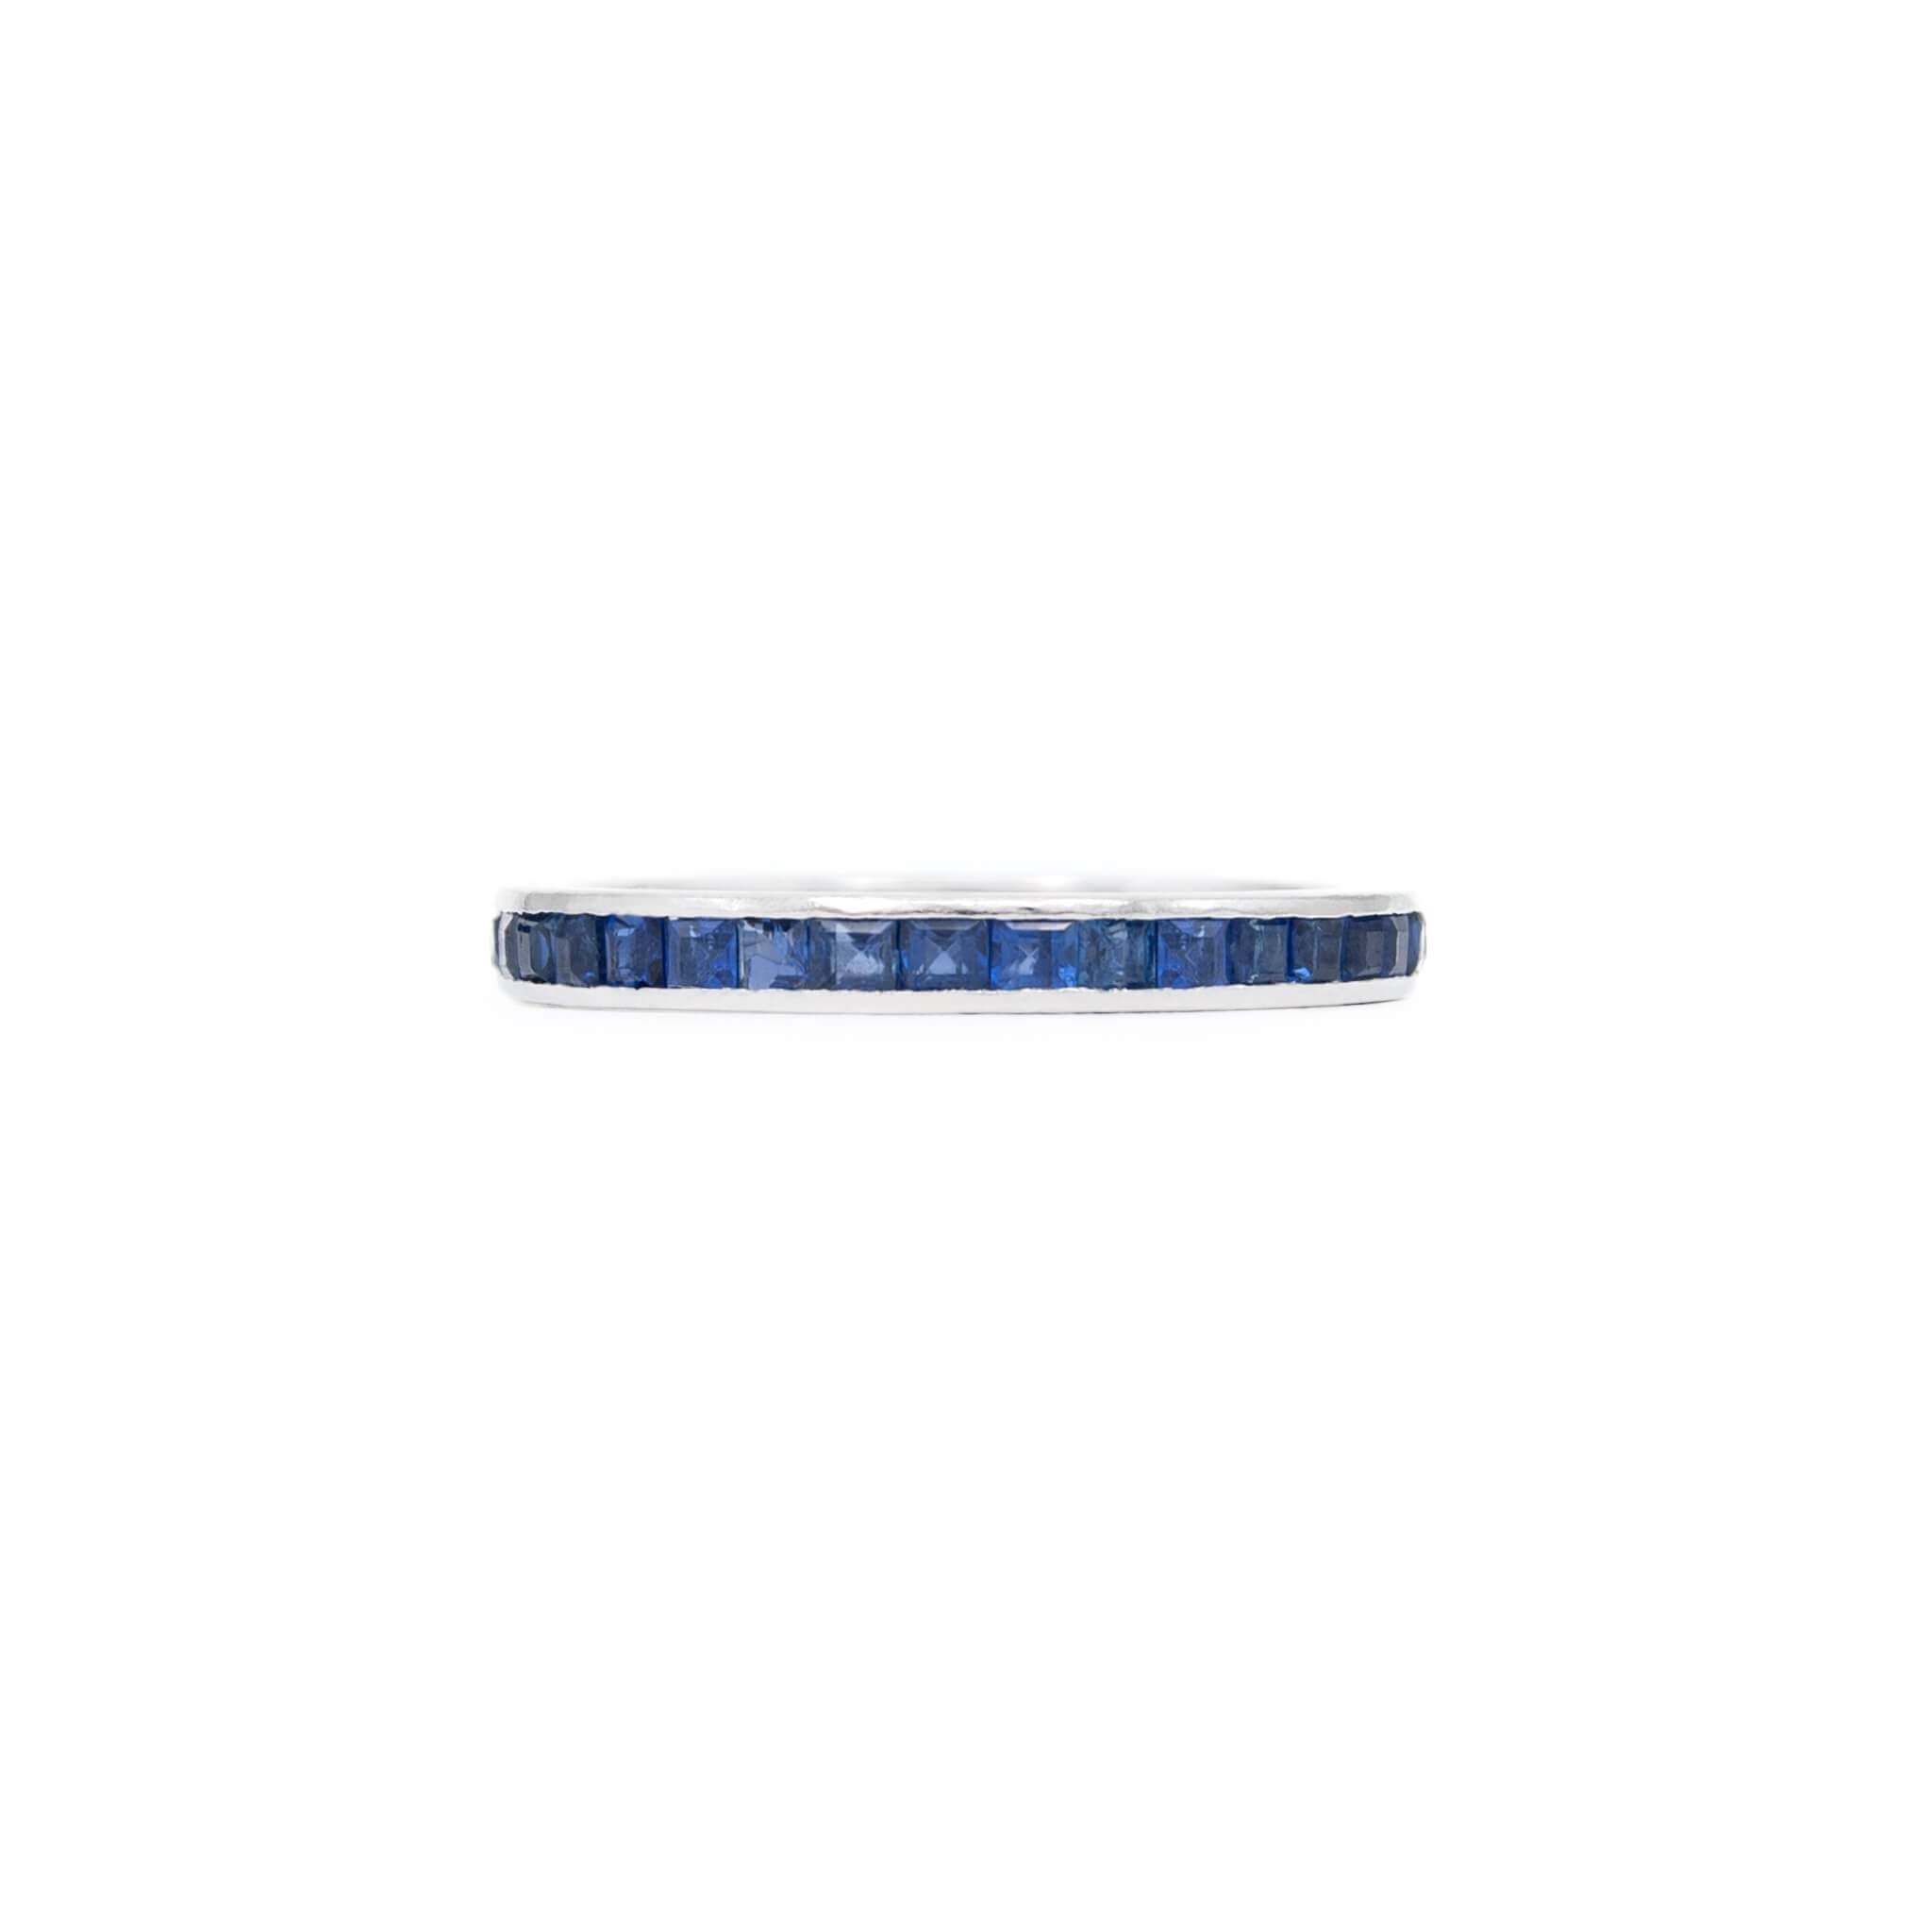 Ladies Vintage Inspired Anniversary Ring With 0.94ct Blue Sapphire and  Diamonds in 14k White Gold